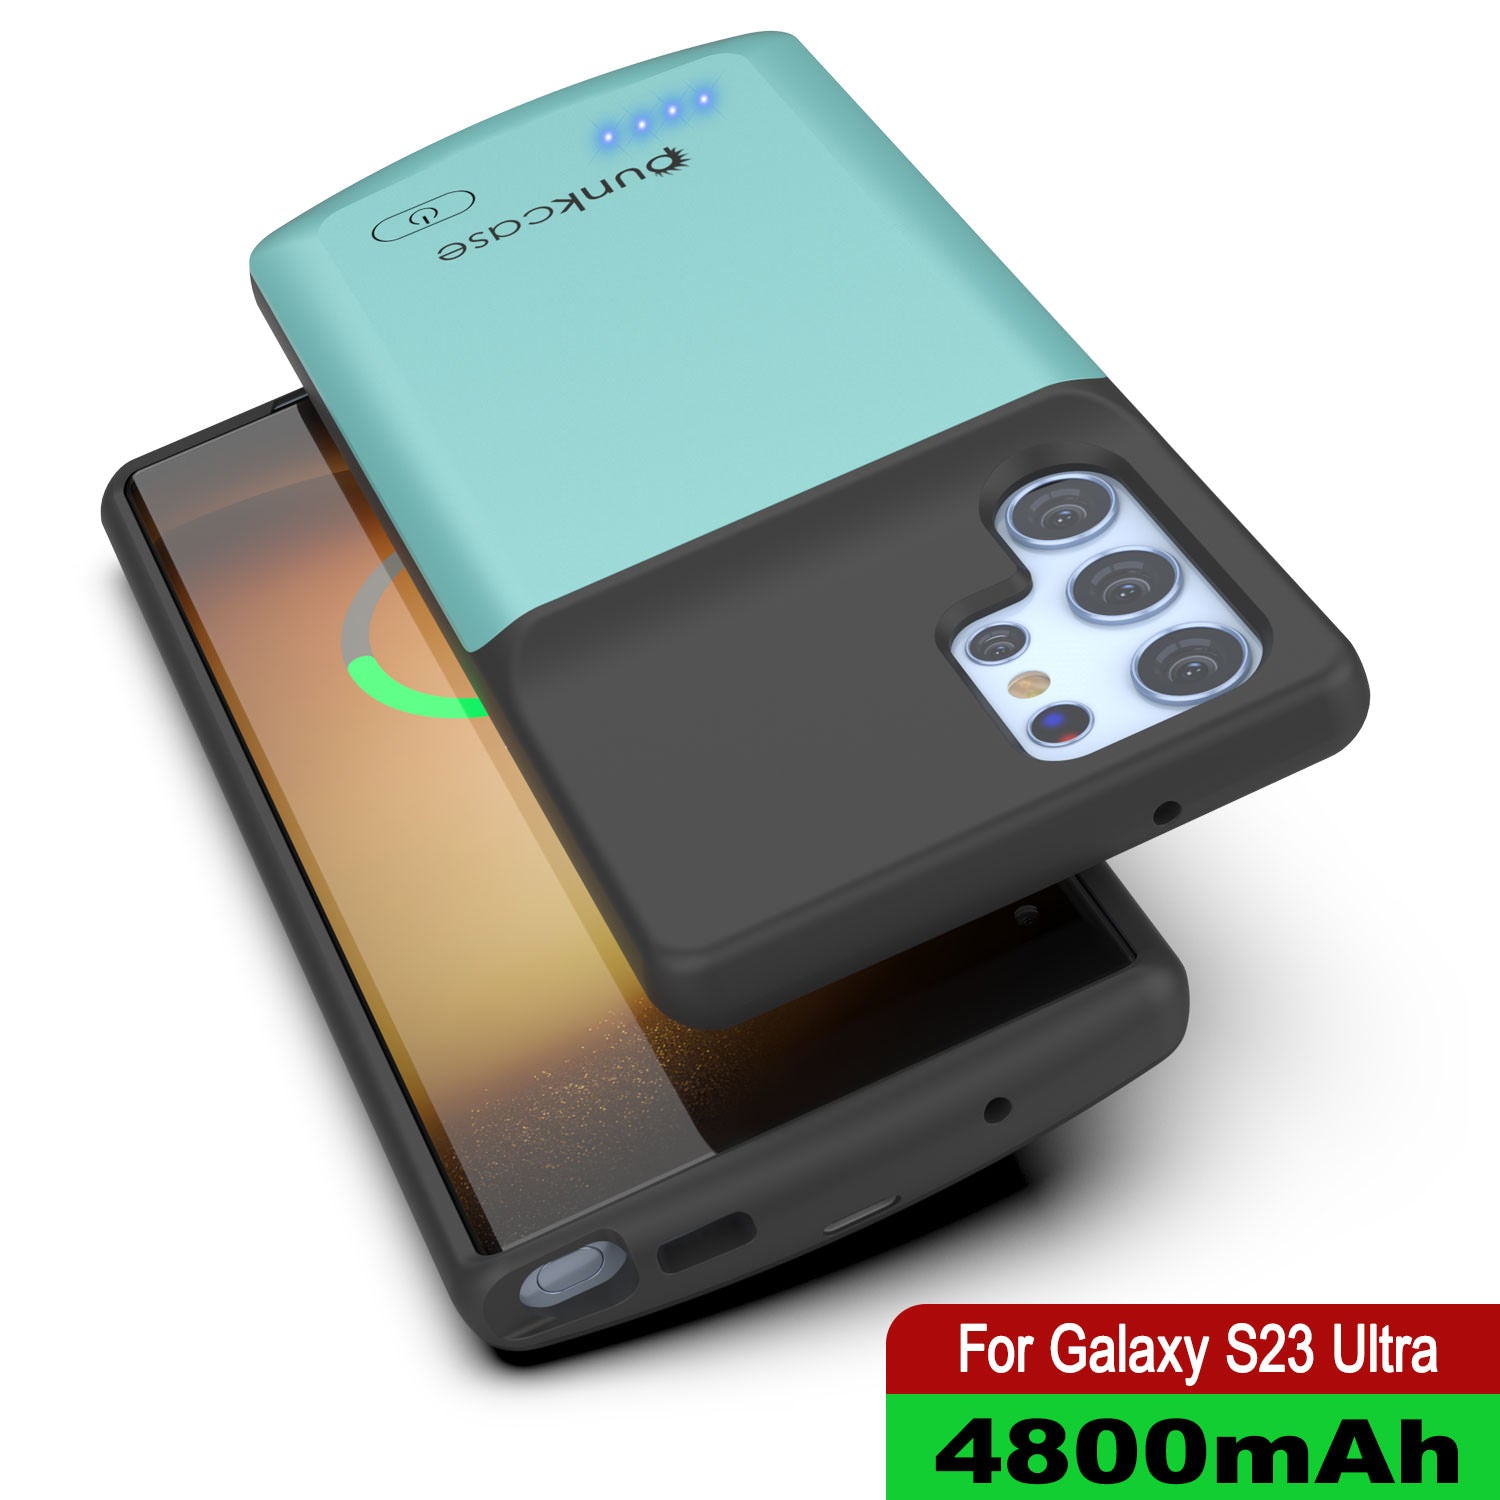 PunkJuice S23 Ultra Battery Case Teal - Portable Charging Power Juice Bank with 4800mAh